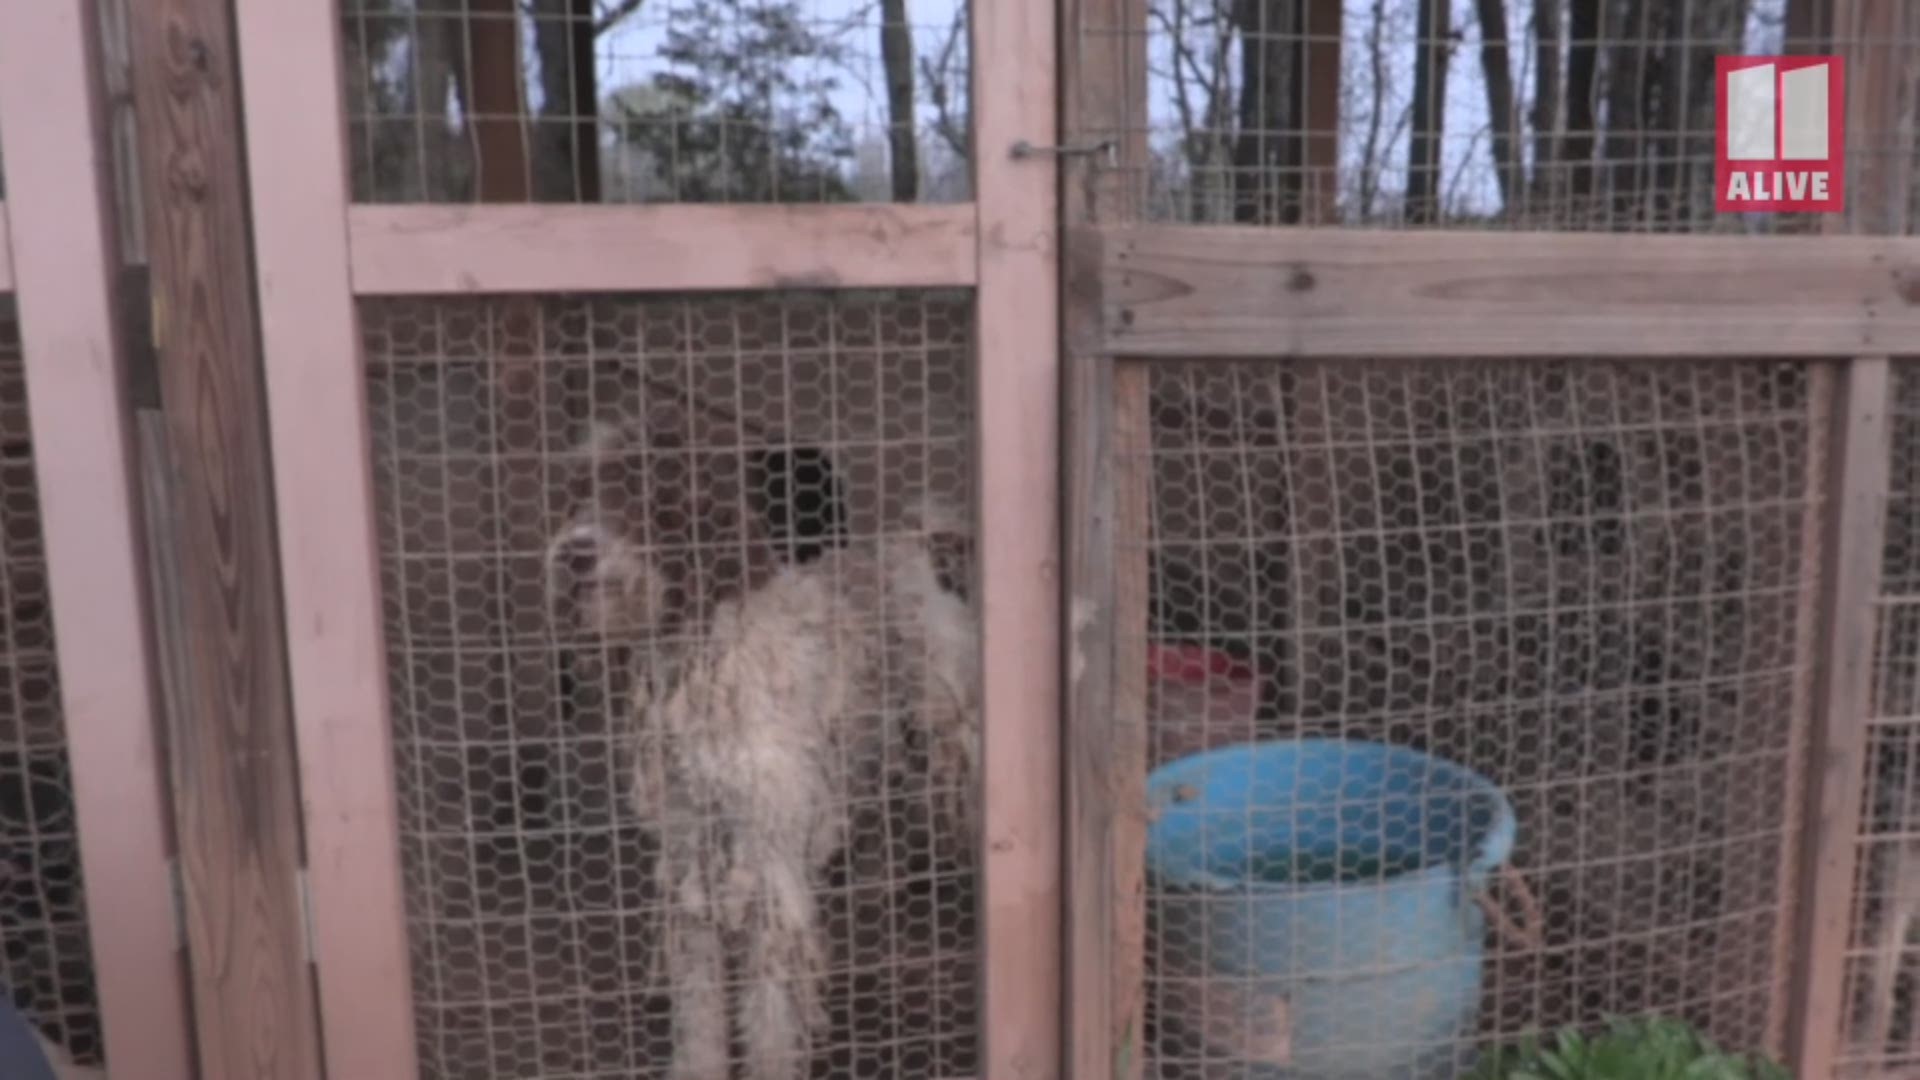 The Atlanta Human Society worked with the Lamar County Sheriff's Office to rescue the dogs from what's being described as a puppy mill.